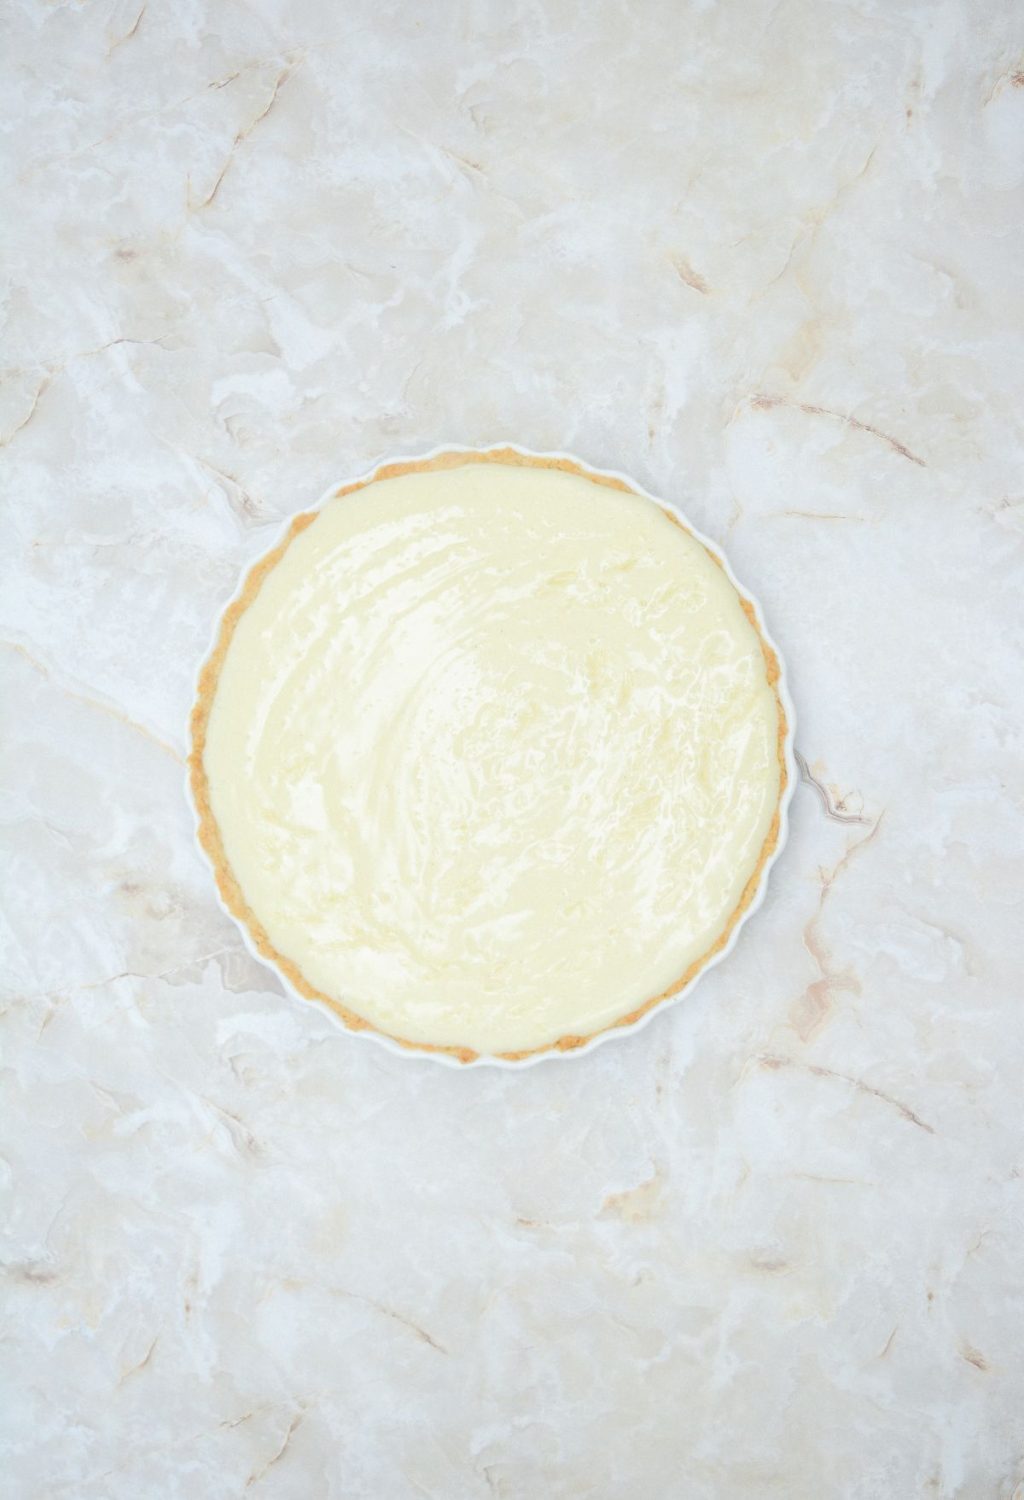 An image of a lemon tart on a marble surface.